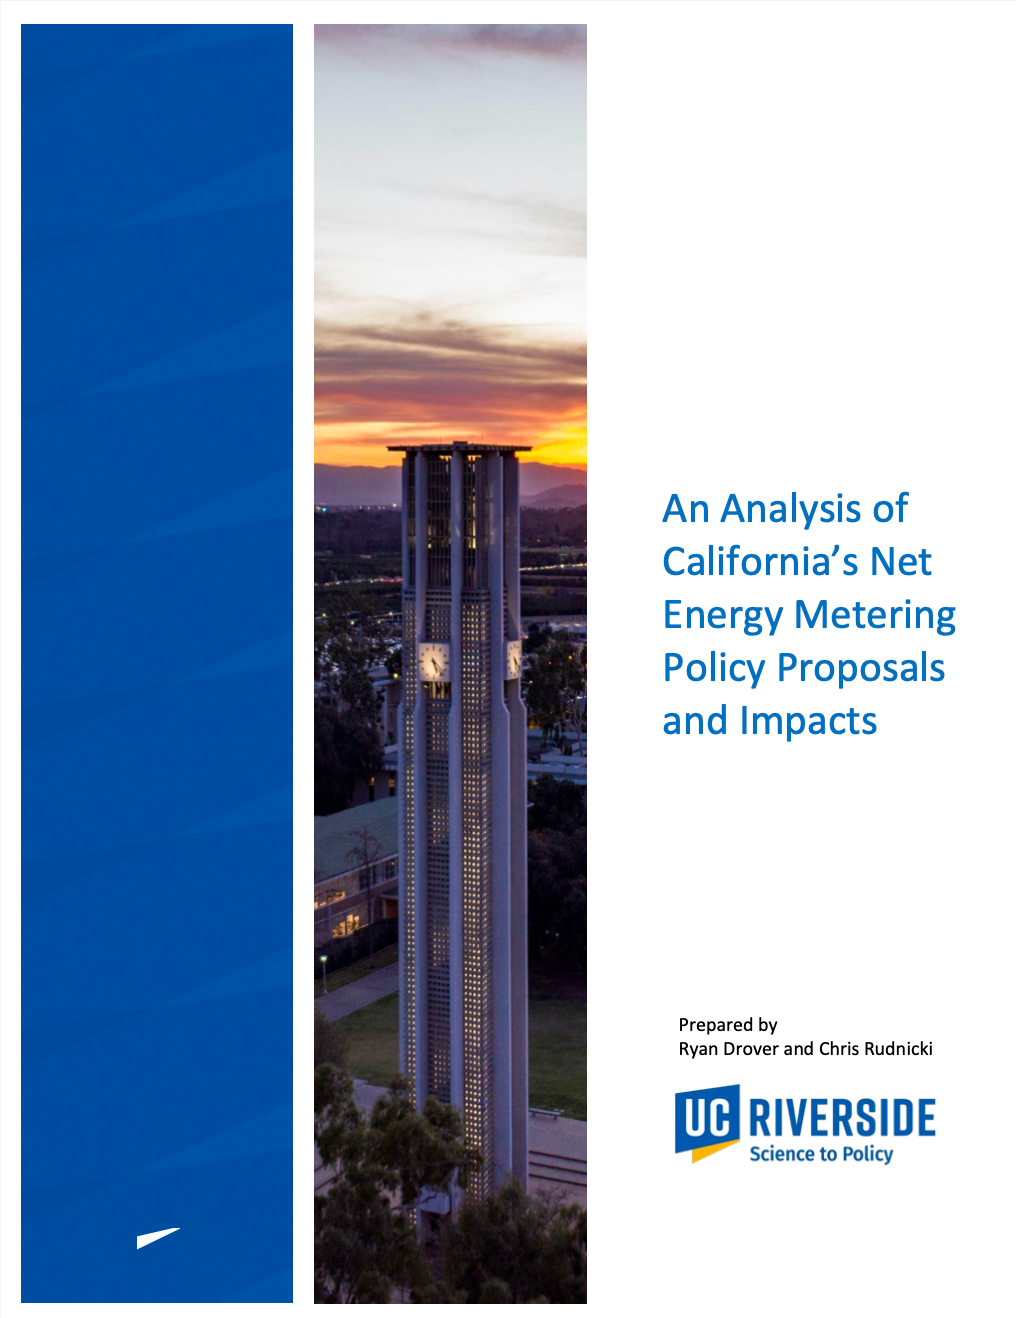 An Analysis of Californias Net Energy Metering Policy Proposals and Impacts